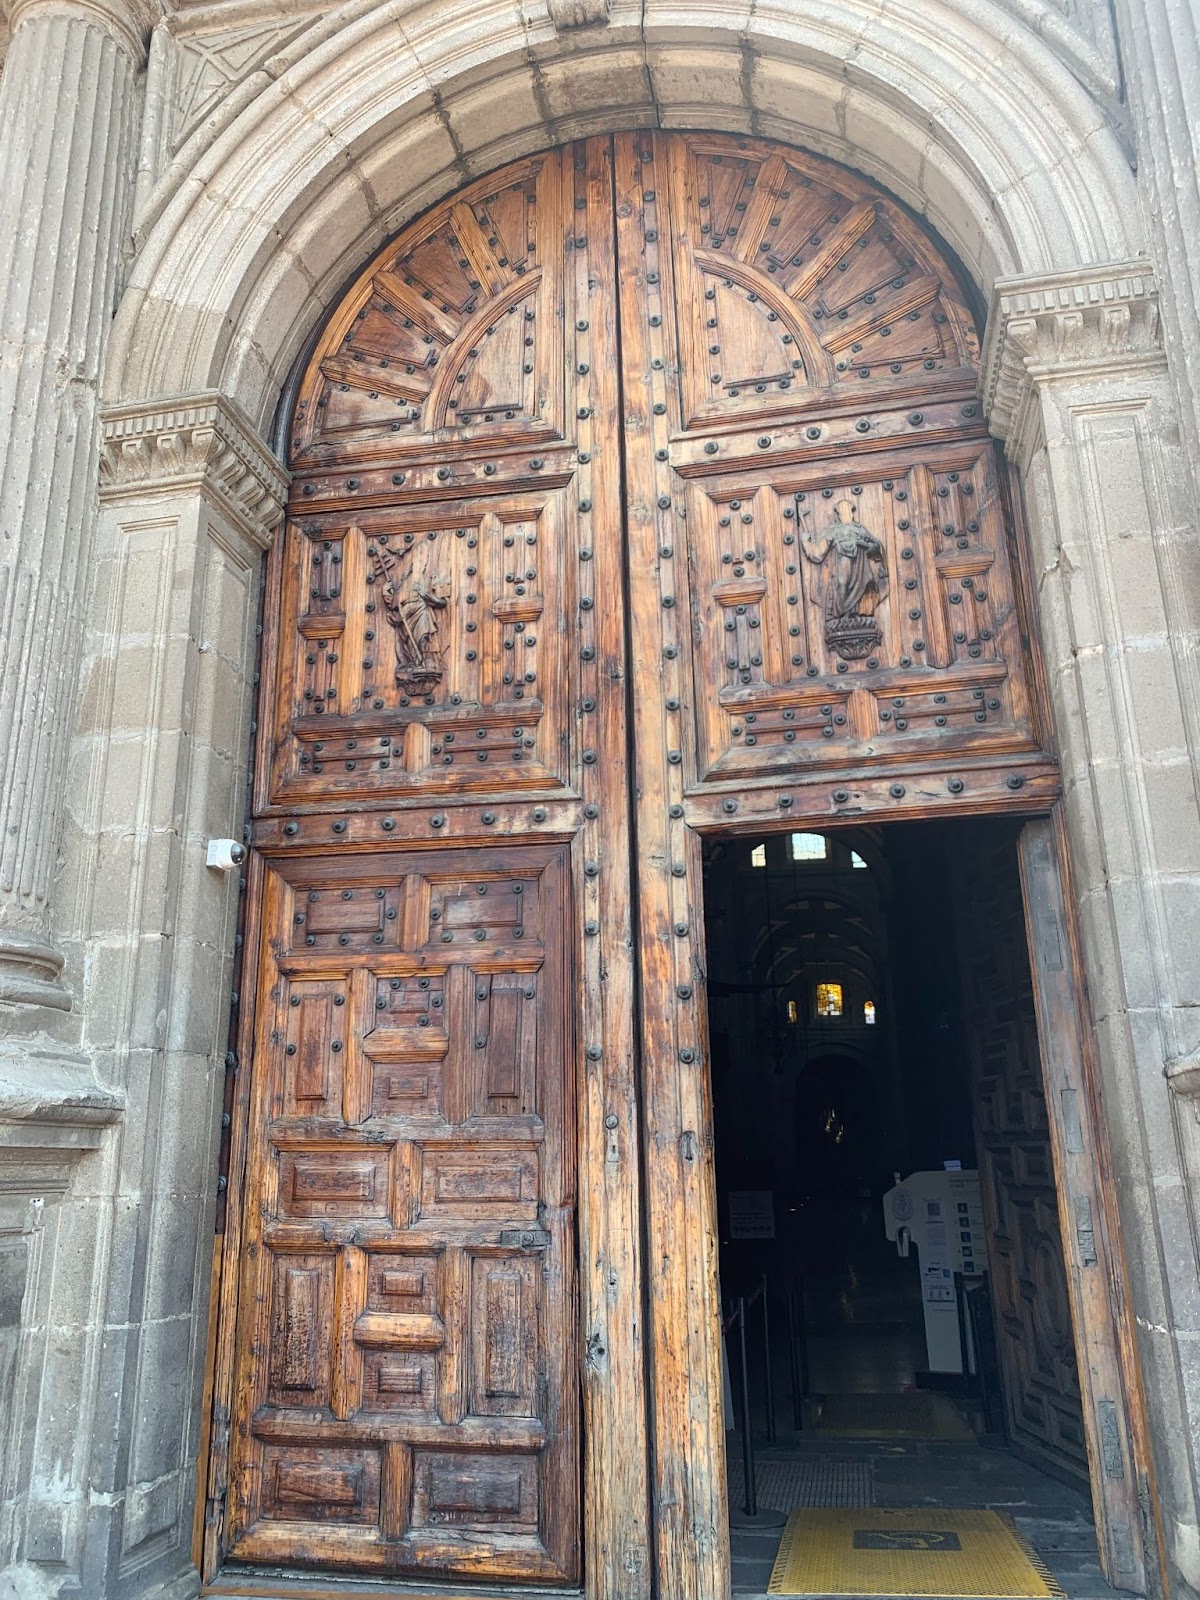 Photo of the entrance of Mexico City’s Metropolitan Cathedral. They are made of large antiquated wood.